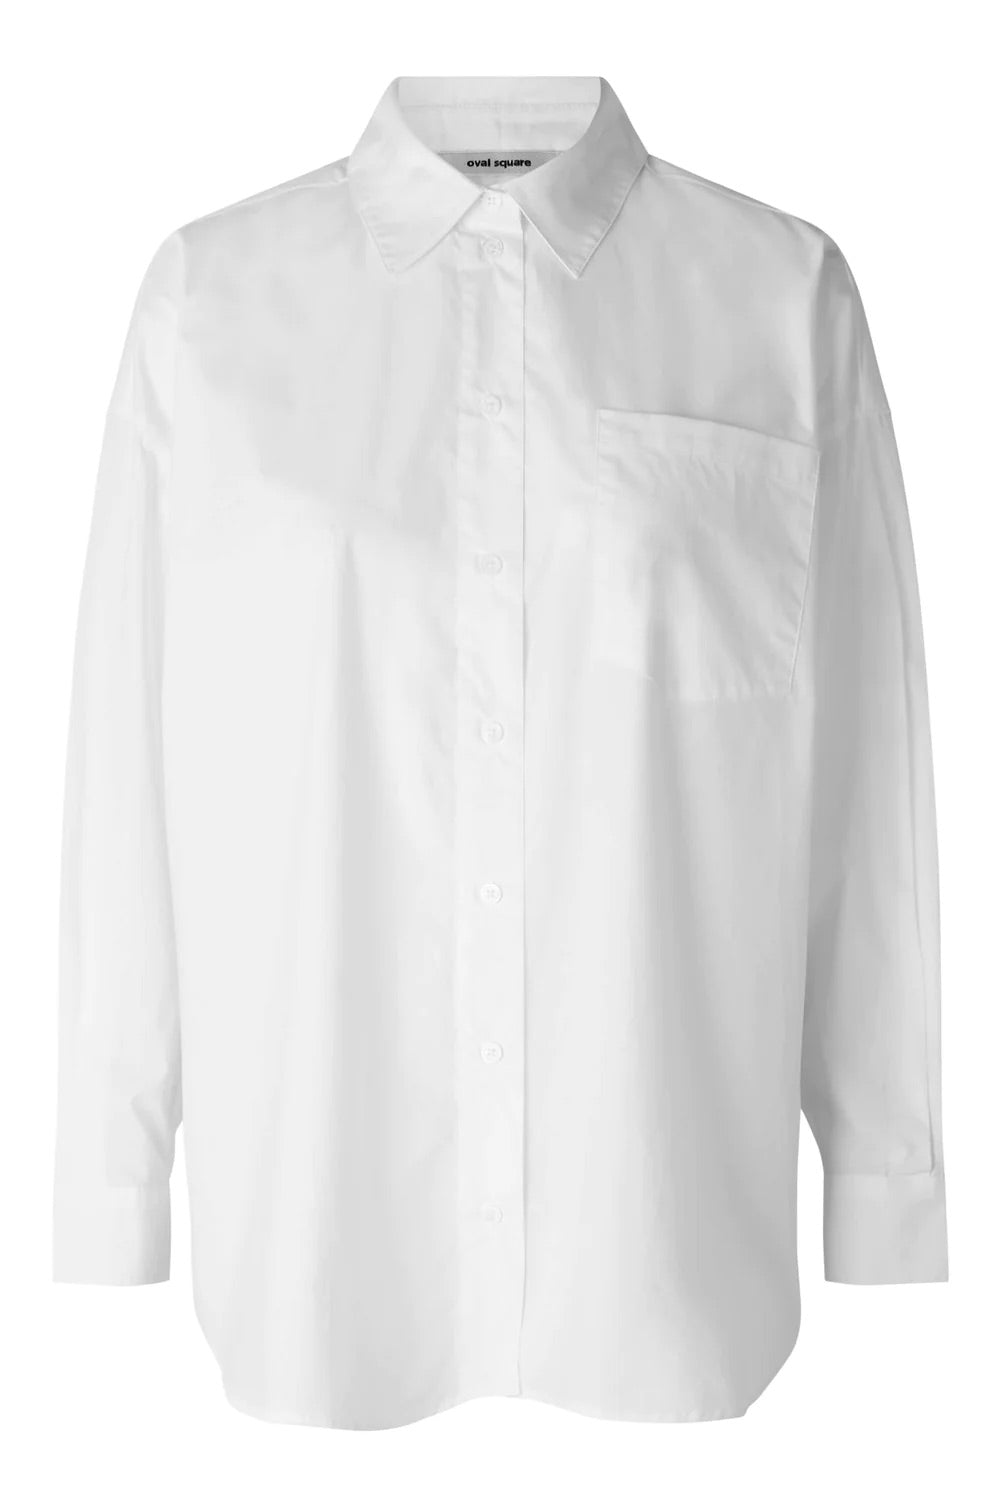 OVAL SQUARE - OSFeeling Shirt - Dale